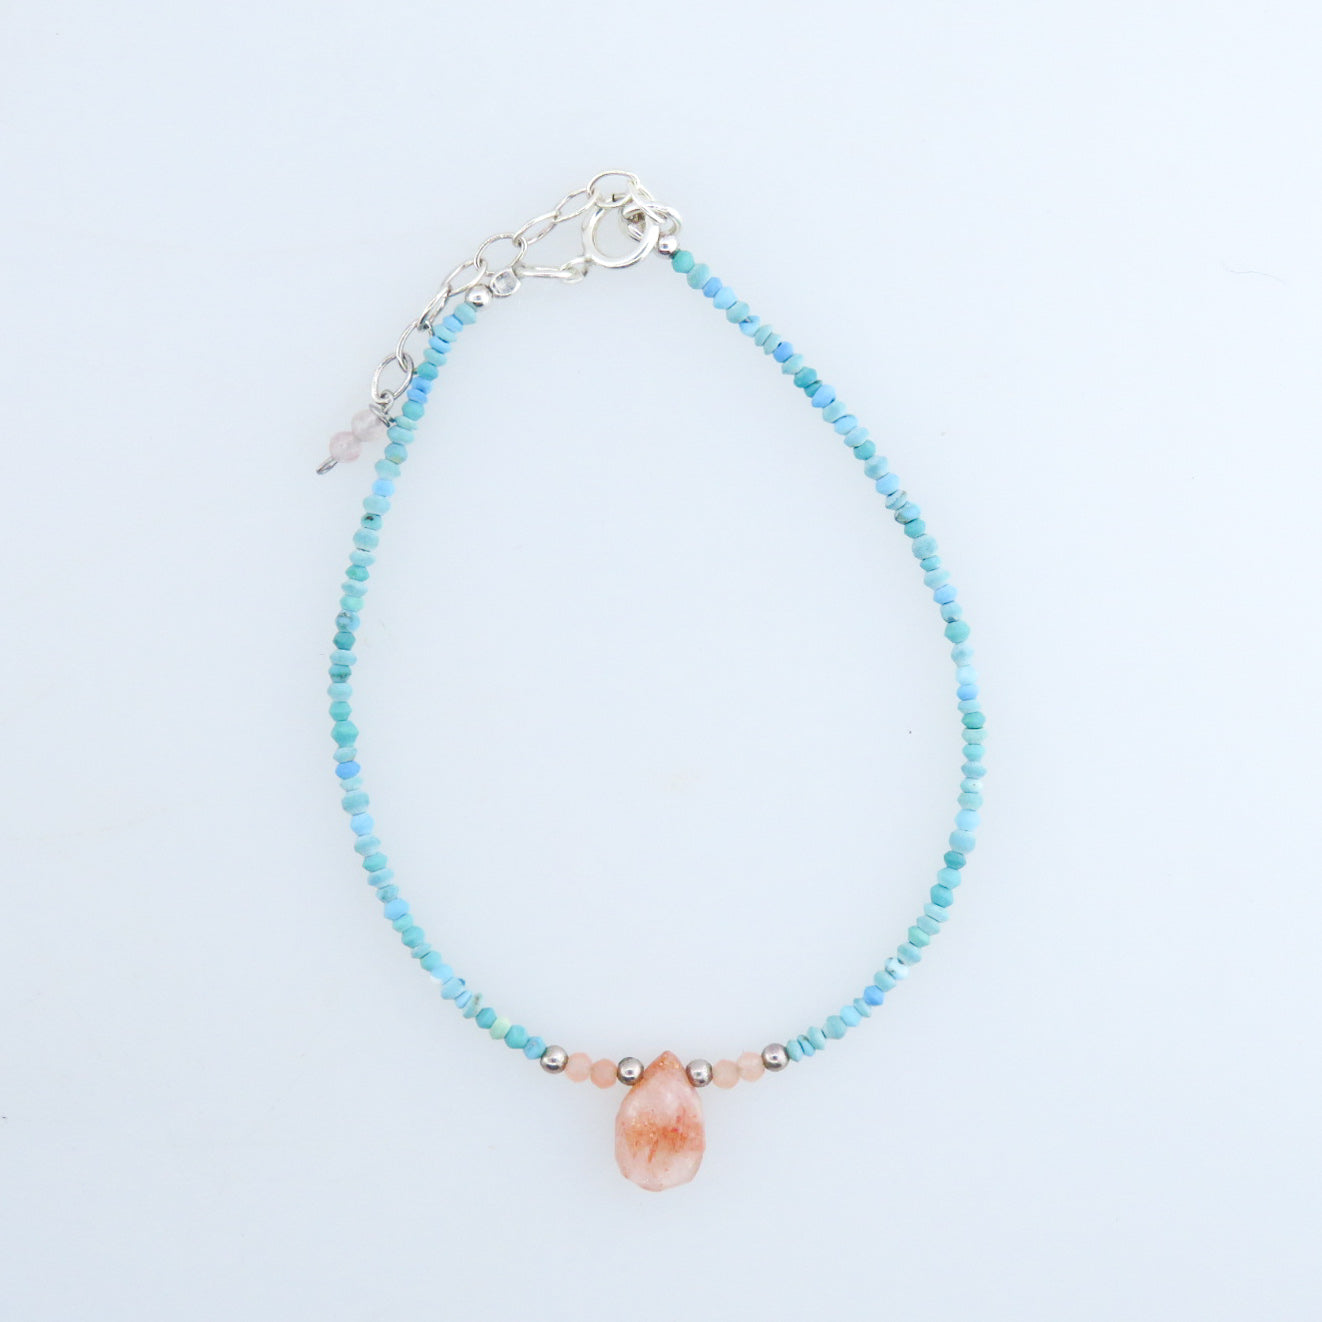 Turquoise Bracelet with Sun Stone and Silver Beads